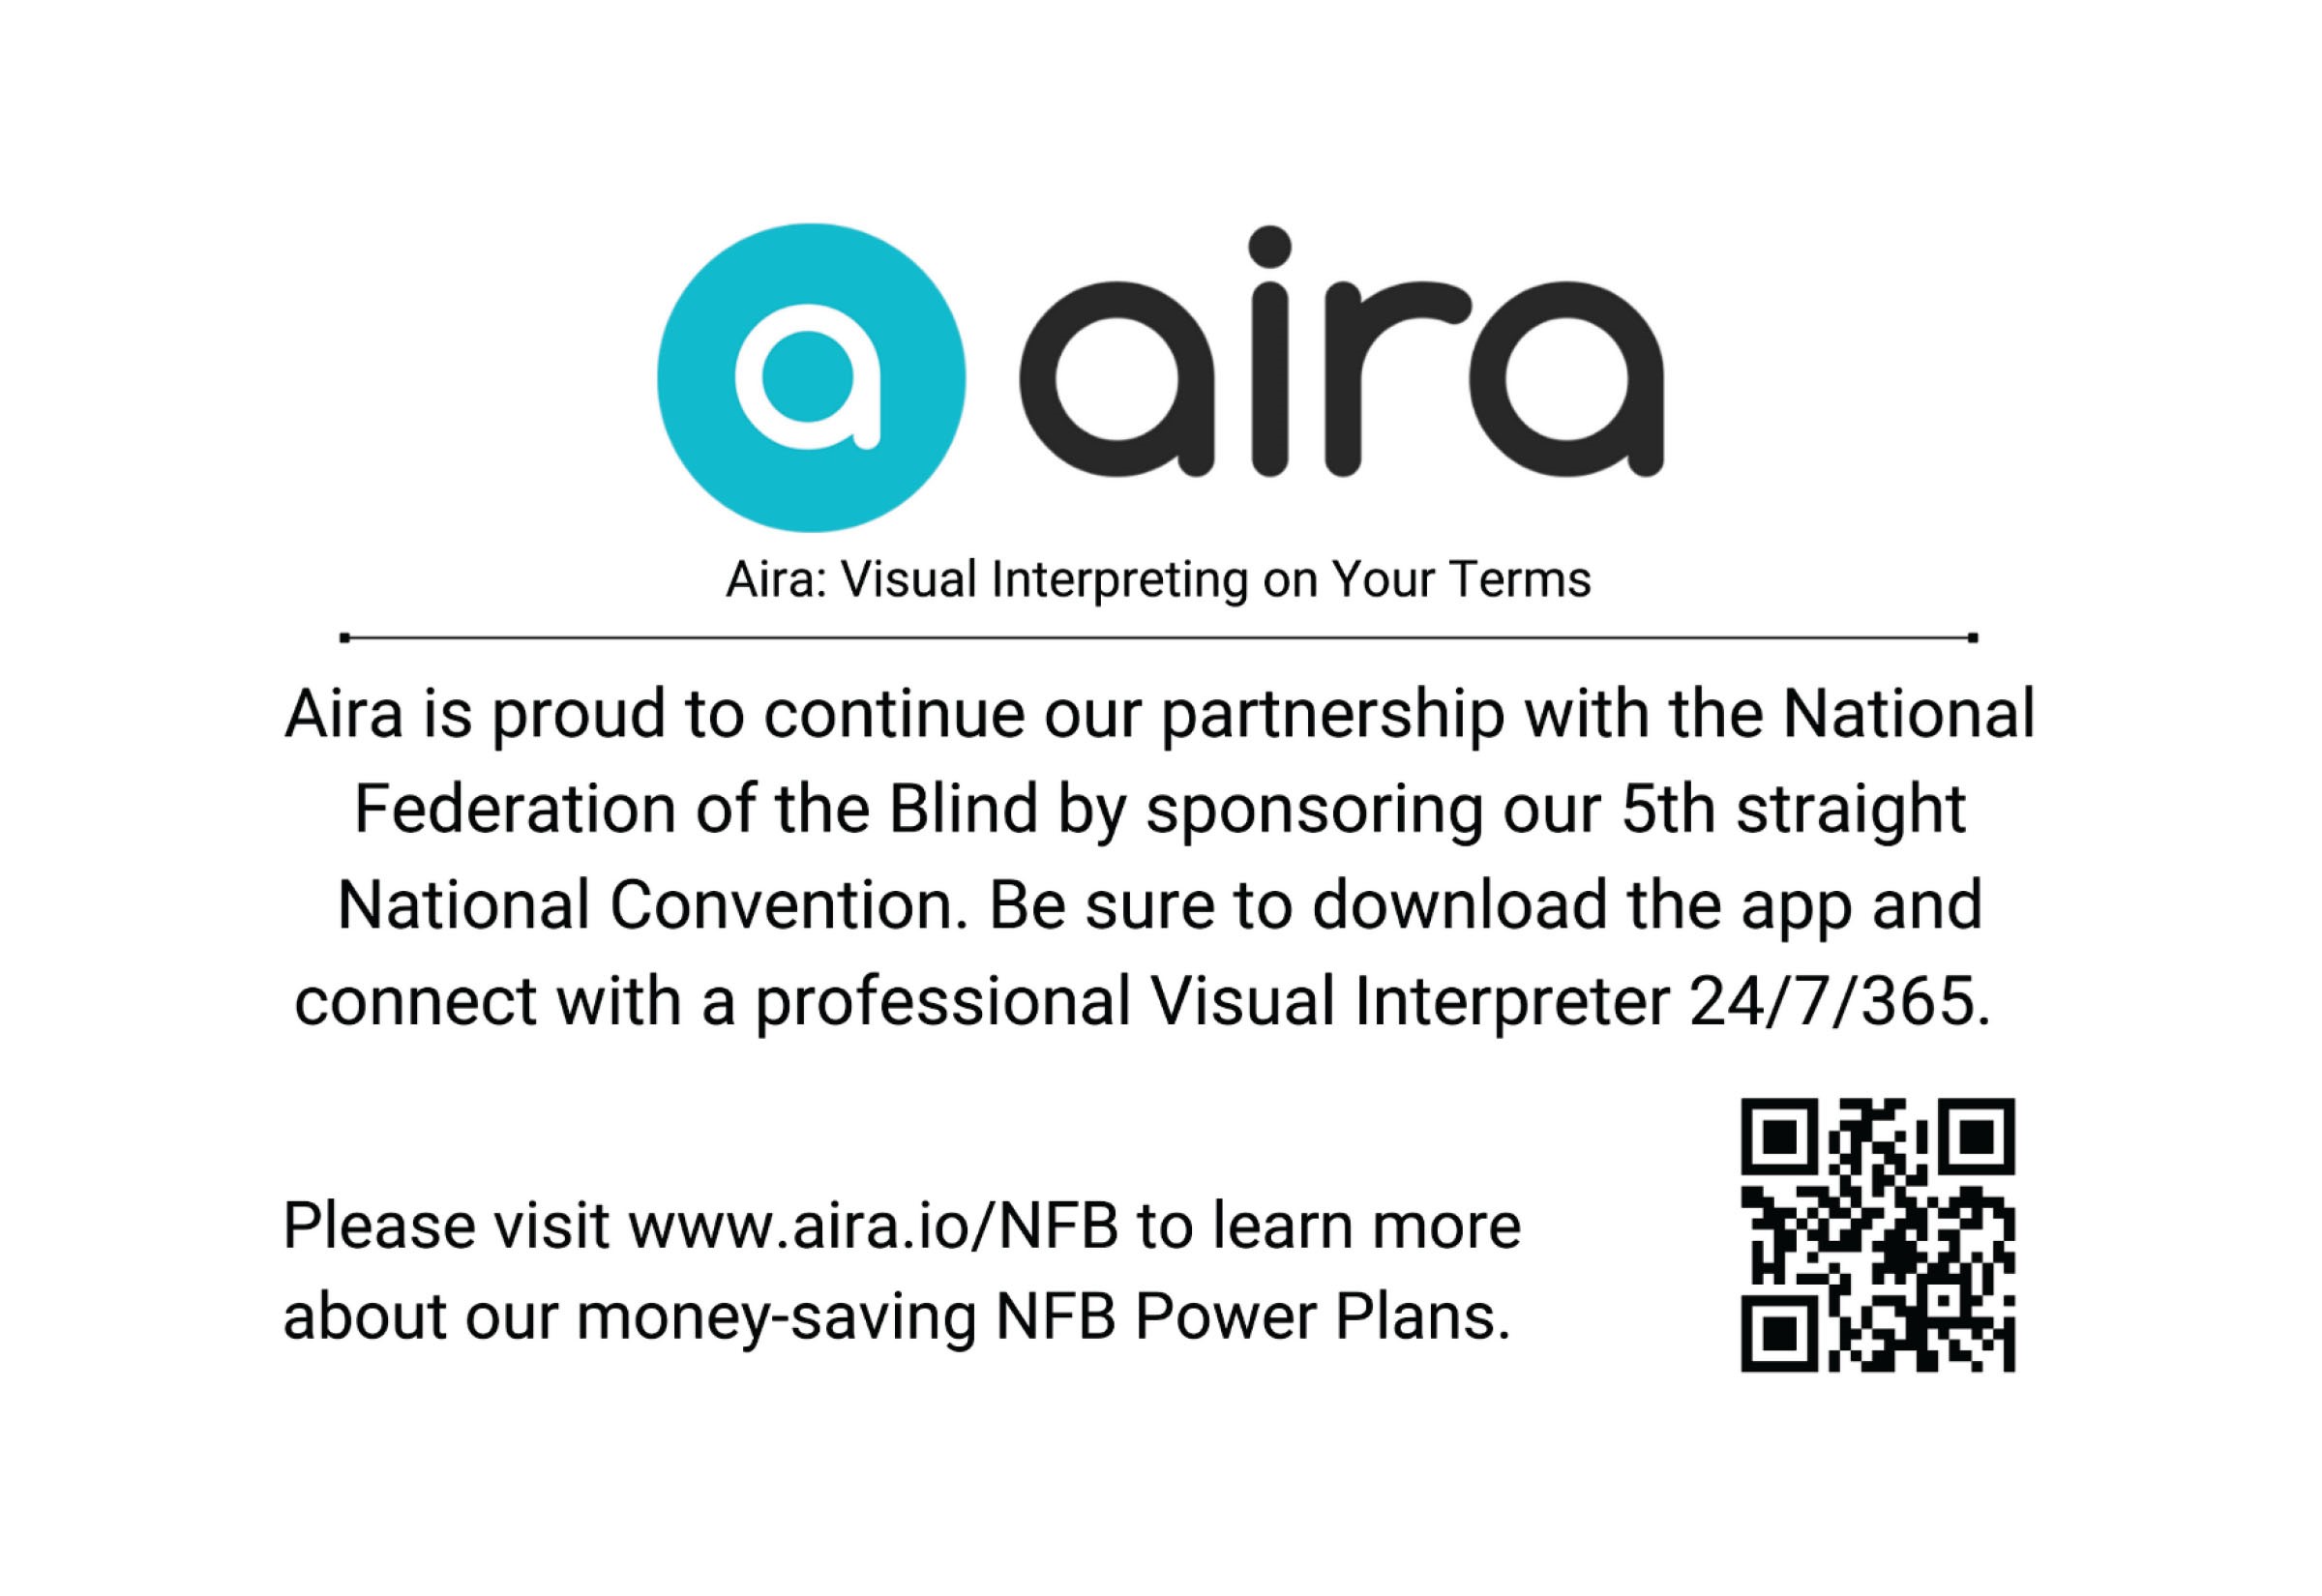 Aira: Visual Interpreting on Your Terms Aira is proud to continue our partnership with the National Federation of the Blind by sponsoring our 5th straight national convention. Be sure to download the app and connect with a professional visual interpreter 24/7/365. Please visit www.aira.io/NFB to learn more about our money-saving NFB Power Plans. 